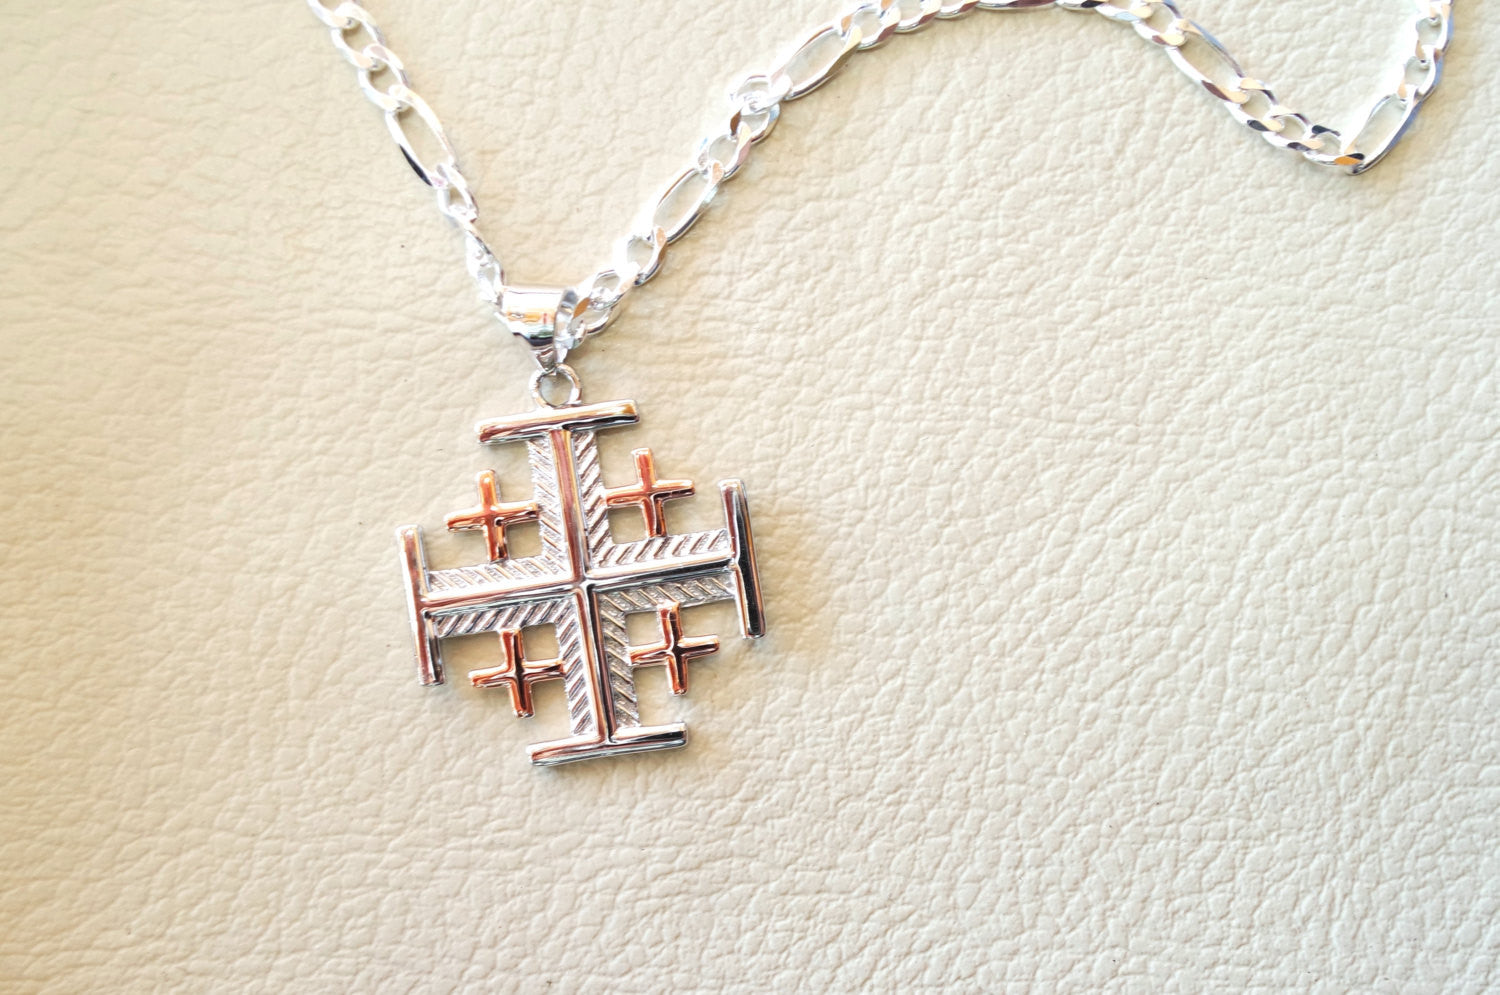 Jerusalem cross pendant two tone with heavy chain sterling silver 925 middle eastern jewelry christianity handmade heavy fast shipping